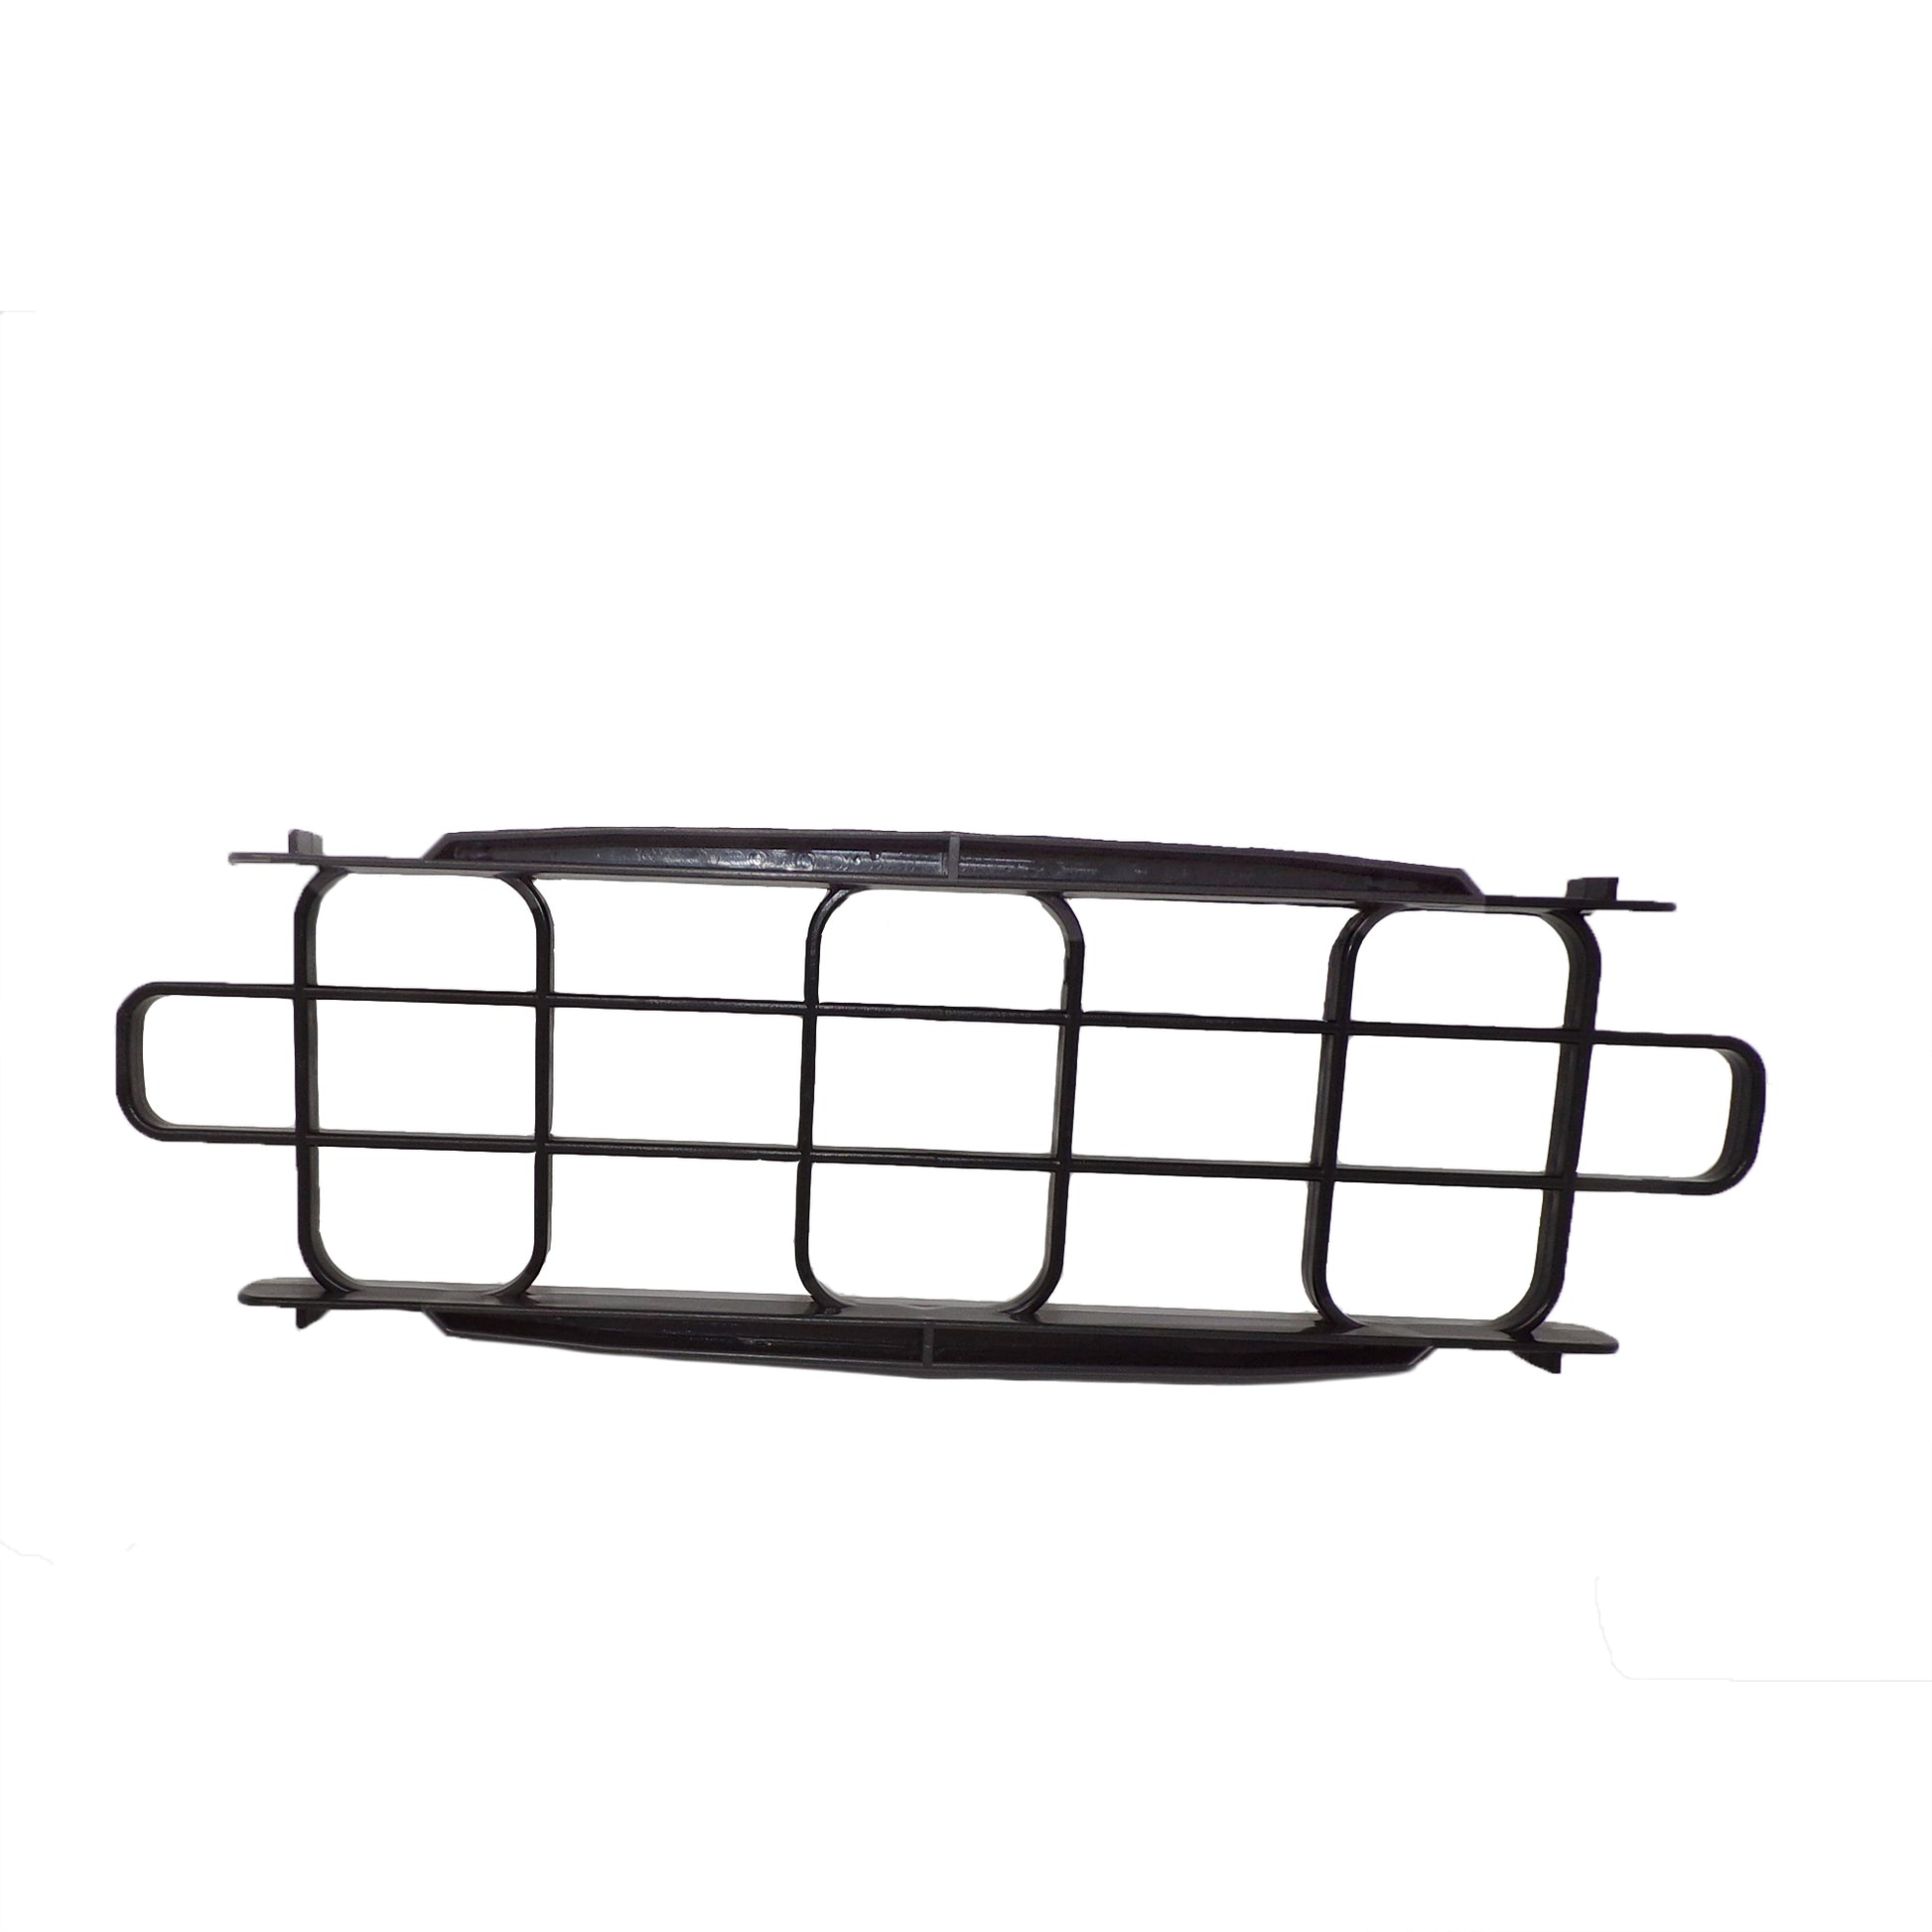 Air Outlet Grille Cover for X-800 Air Mover